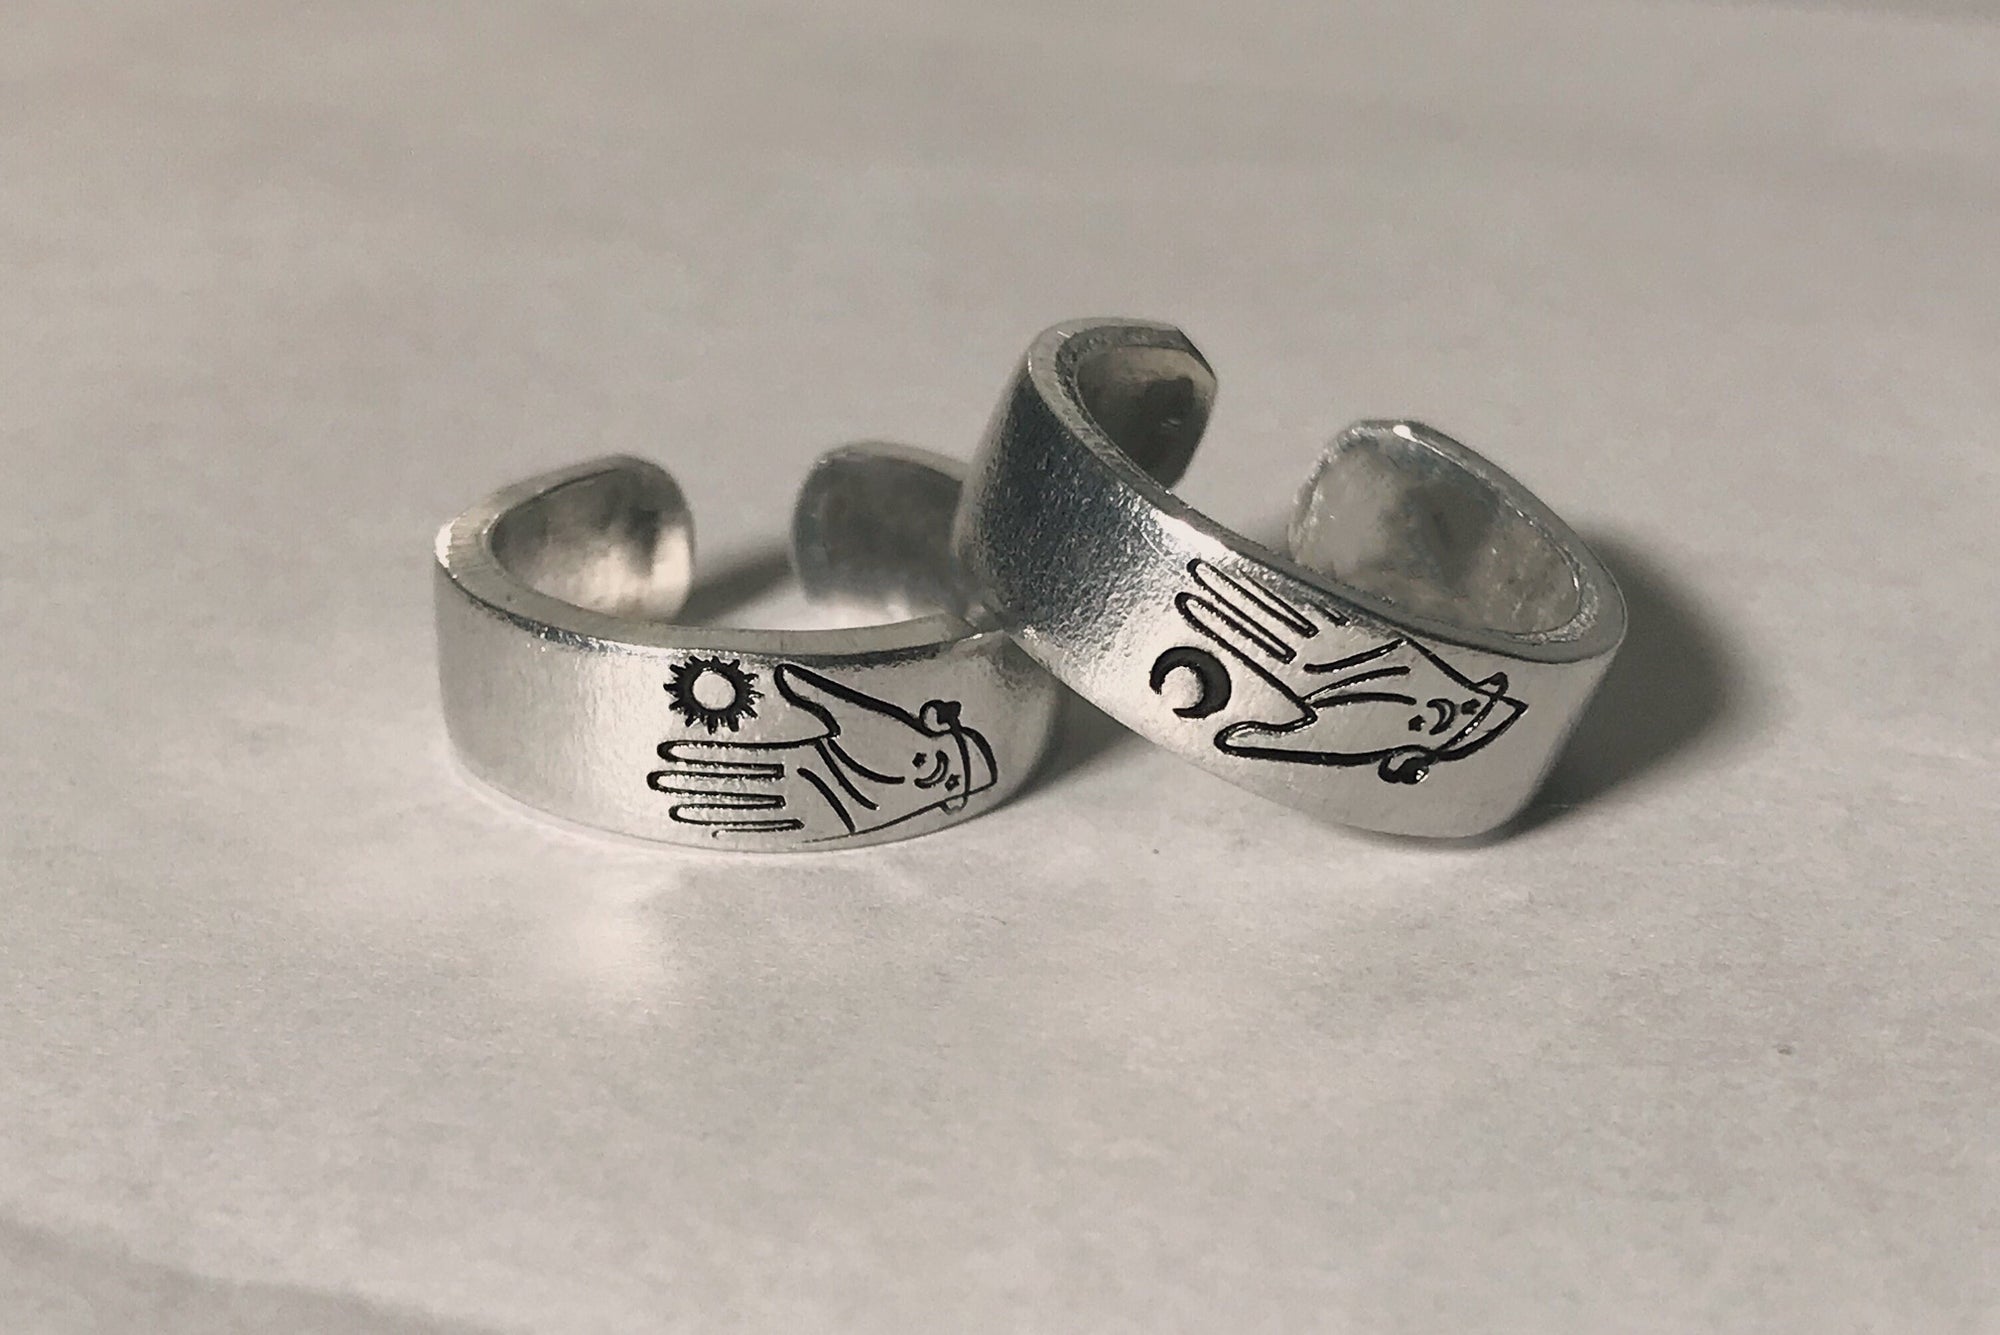 Matching Rings For Best Friends - Shop on Pinterest